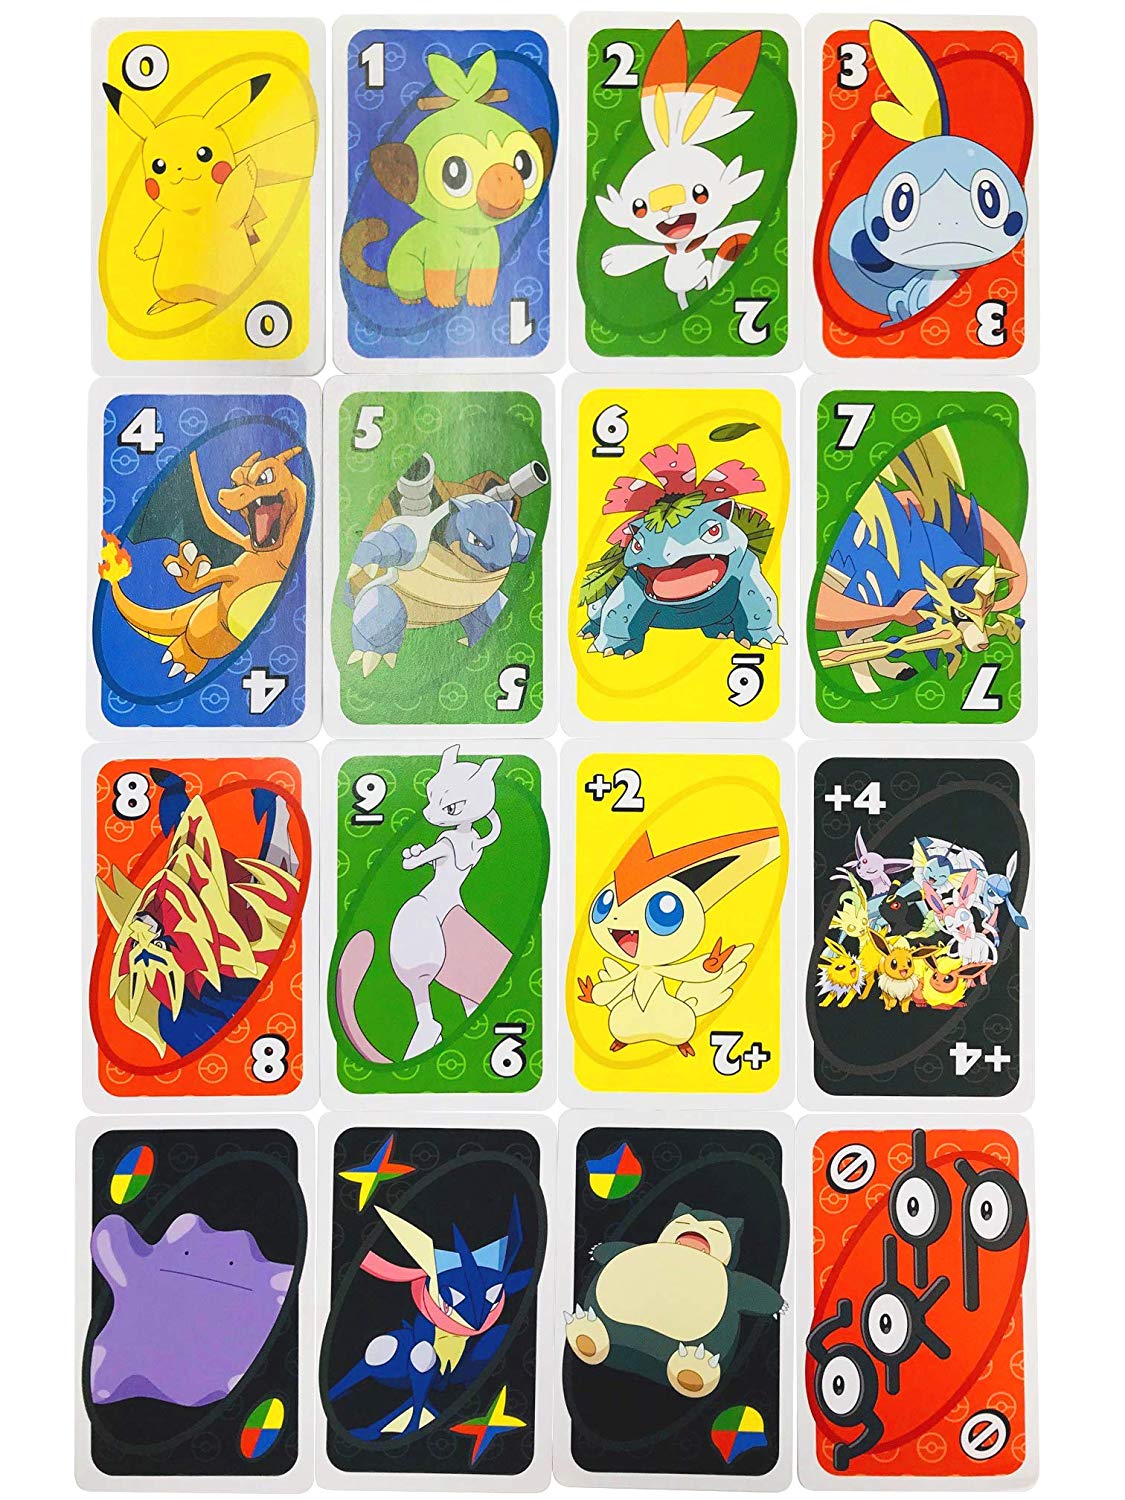 Details about   Pokemon UNO Deck Mattel Brand New Special Rule Card with Snorlax & Greninja 